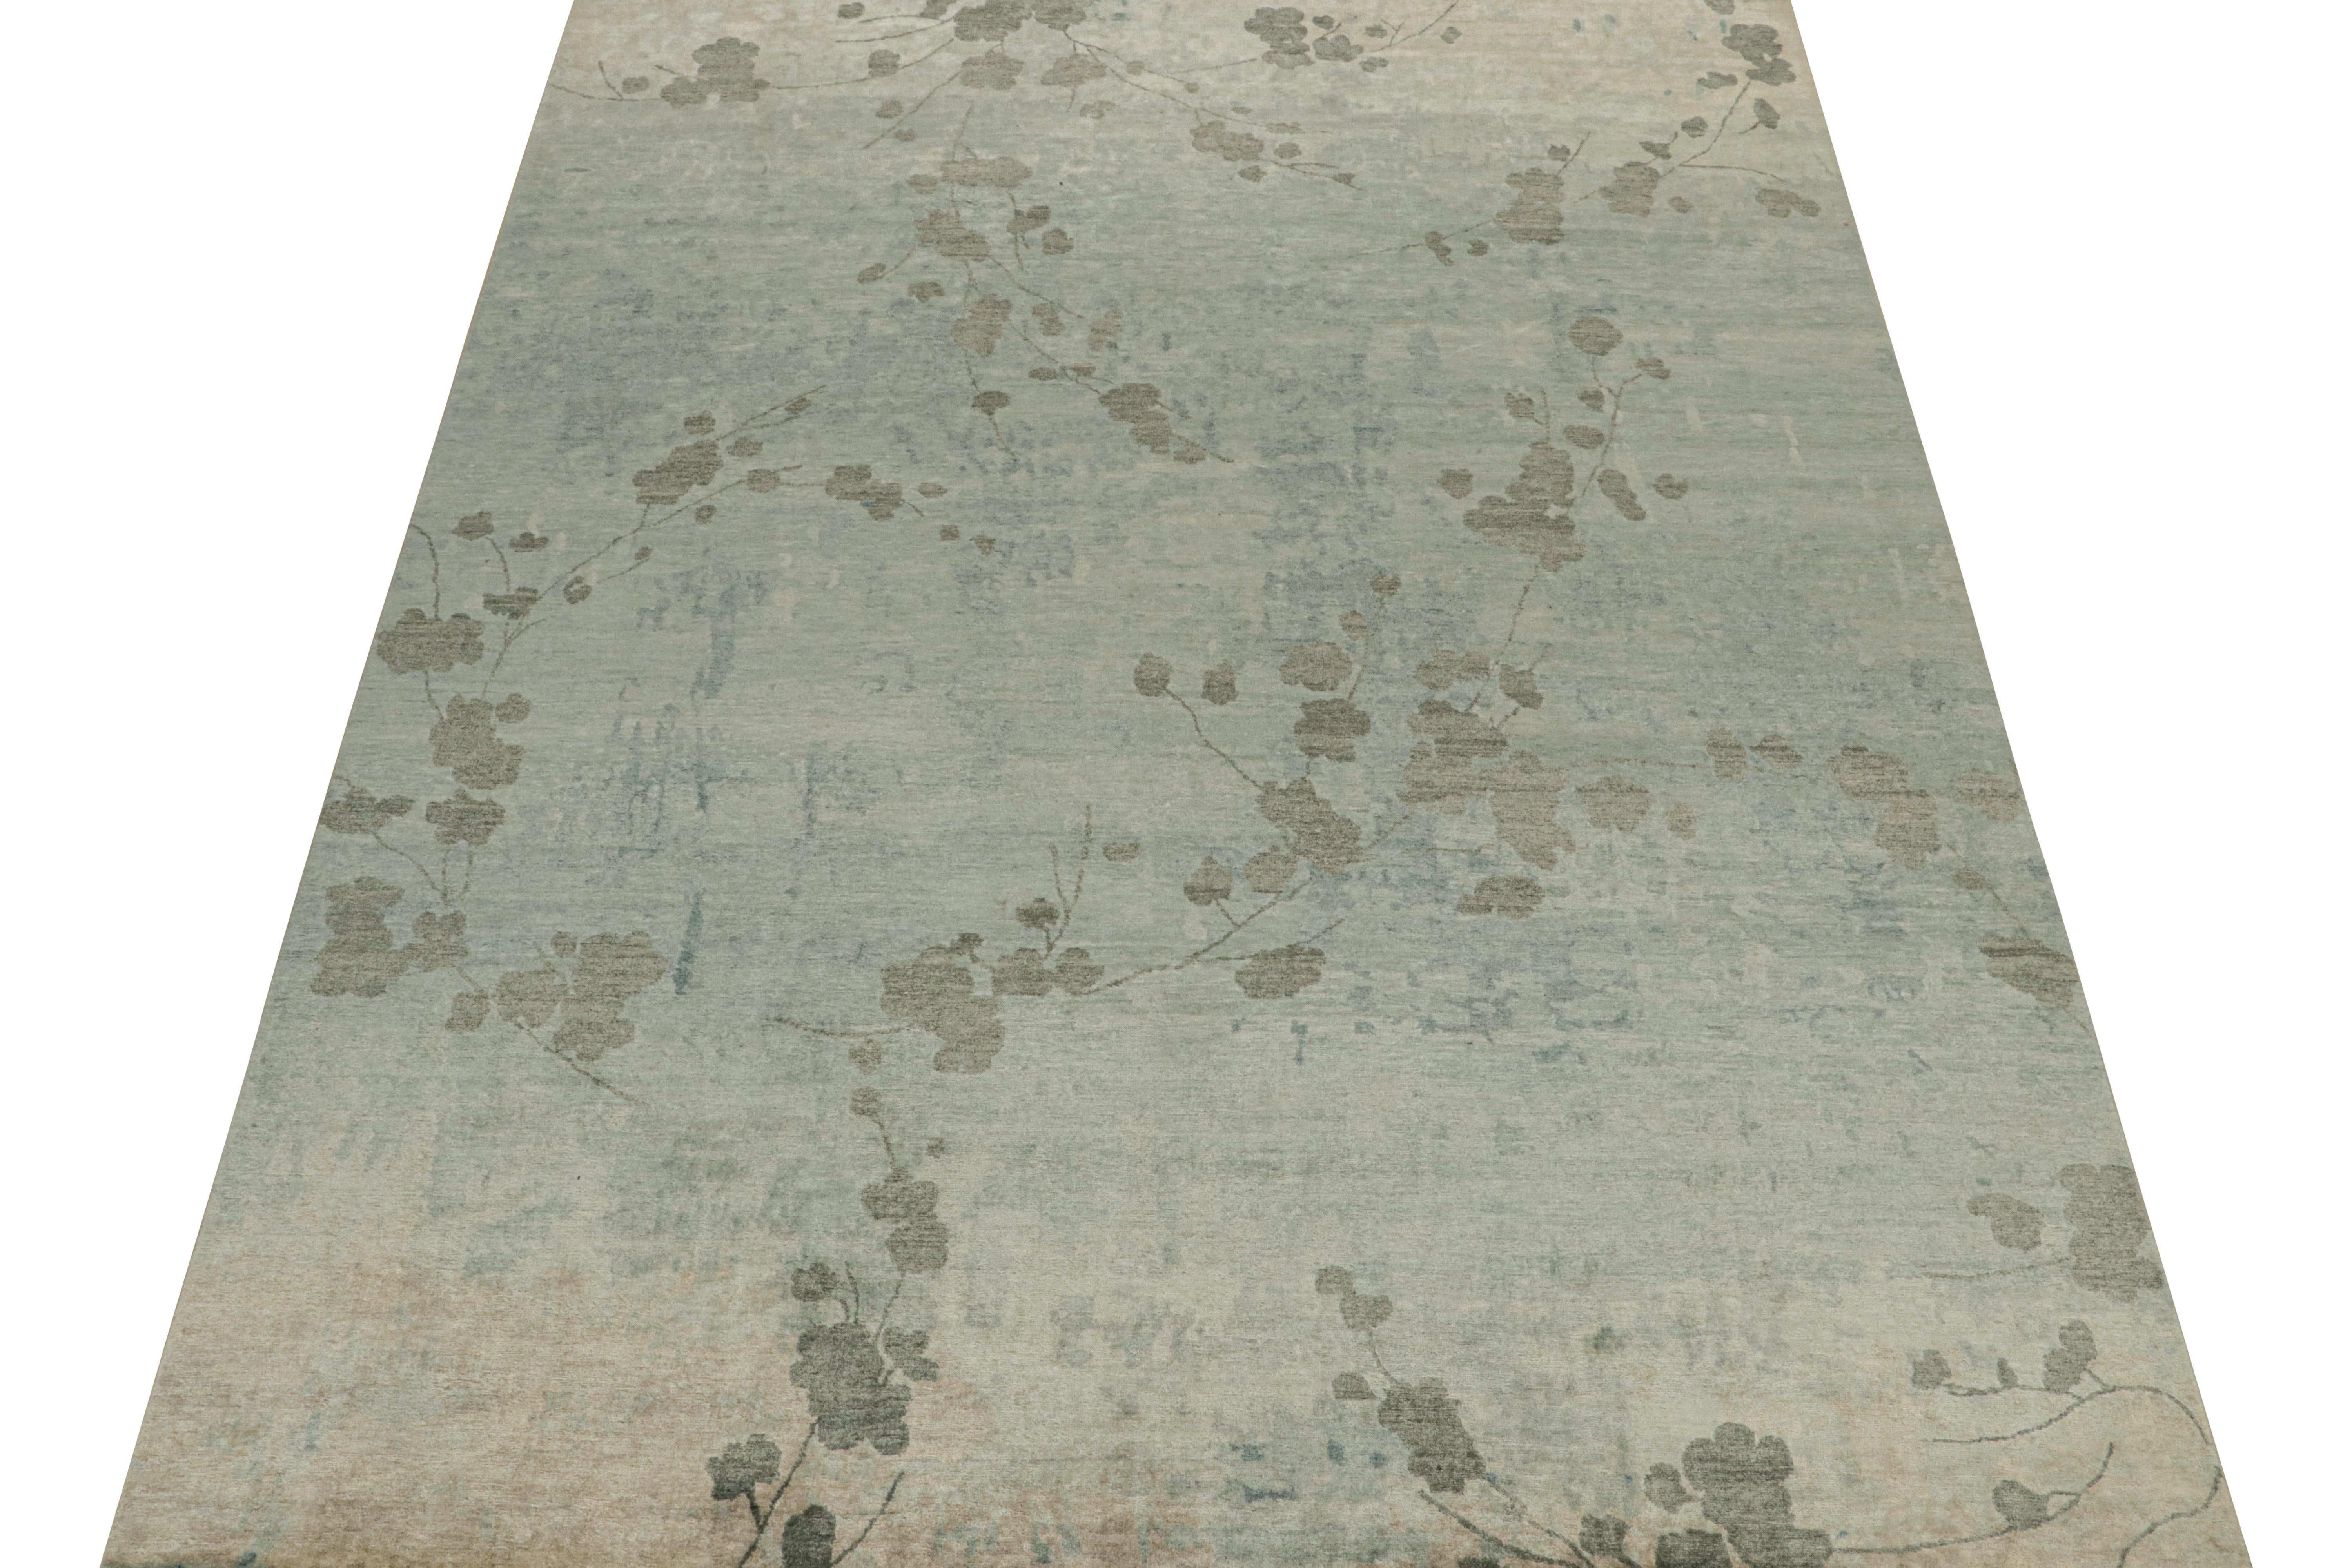 This 9x12 abstract rug is a bold new addition to Rug & Kilim’s Modern rug collection. Hand-knotted in wool and silk, its design explores painterly sensibilities in the most exceptional high-end quality.

Keen eyes will further admire a subdued take